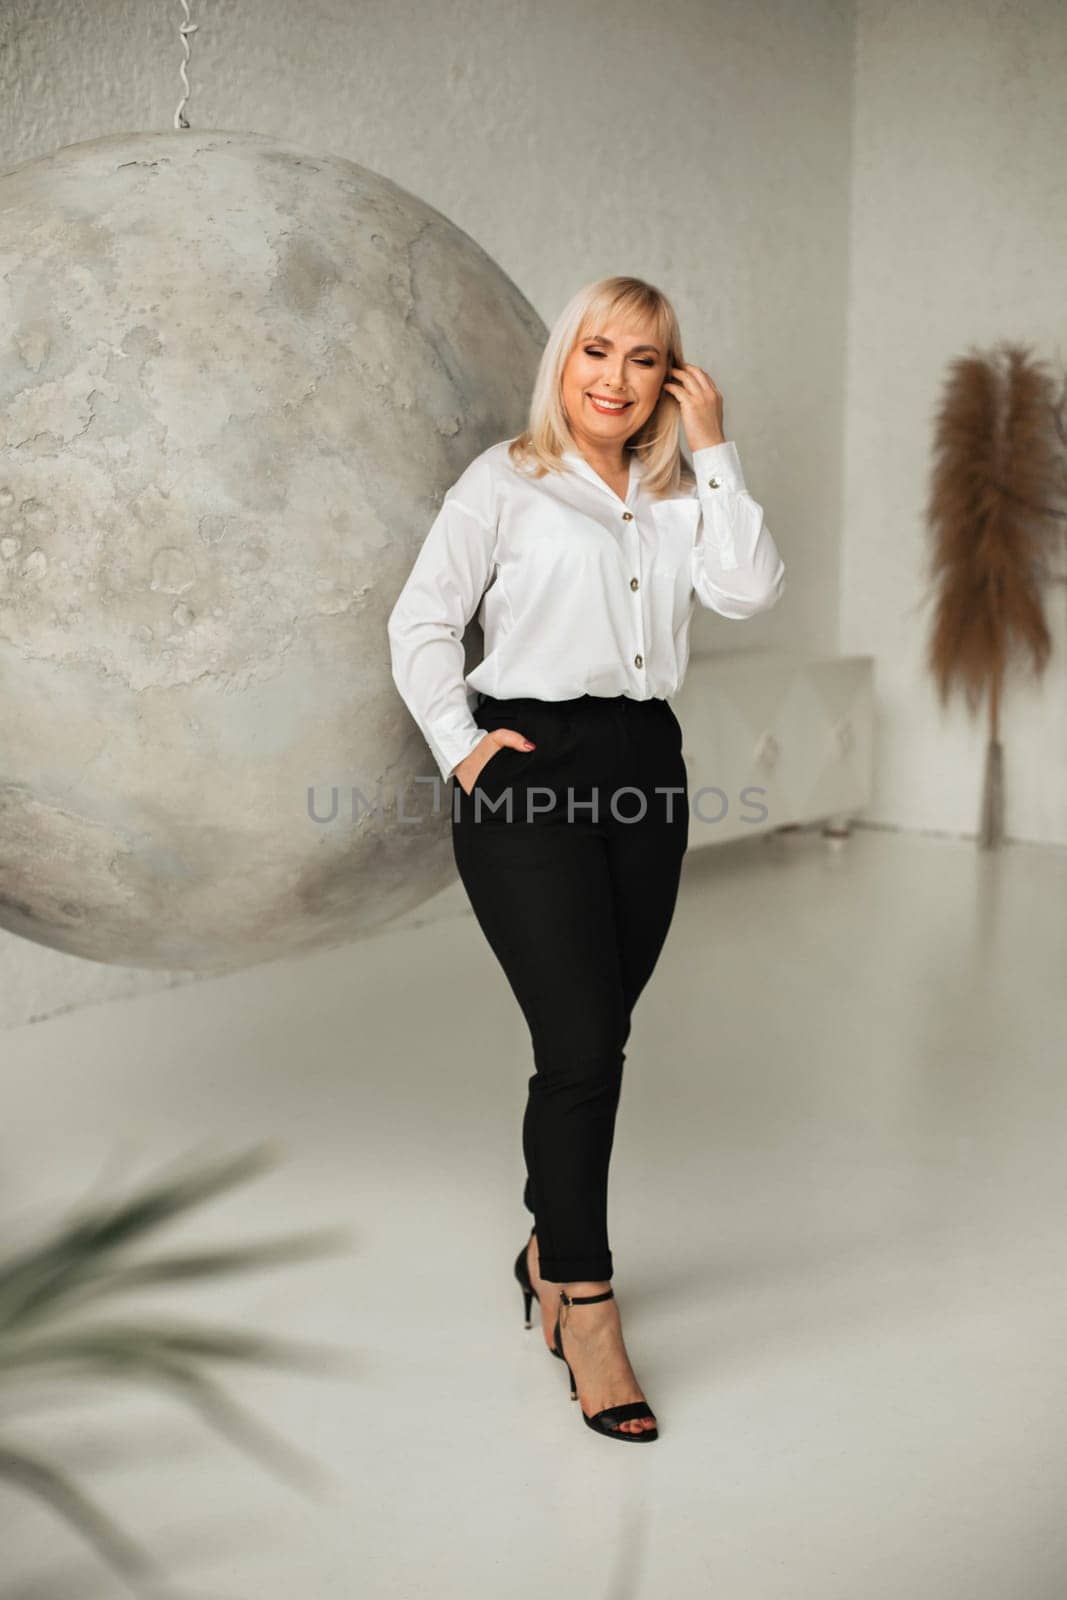 A fashionable woman In a white shirt and black pants poses in the interior.